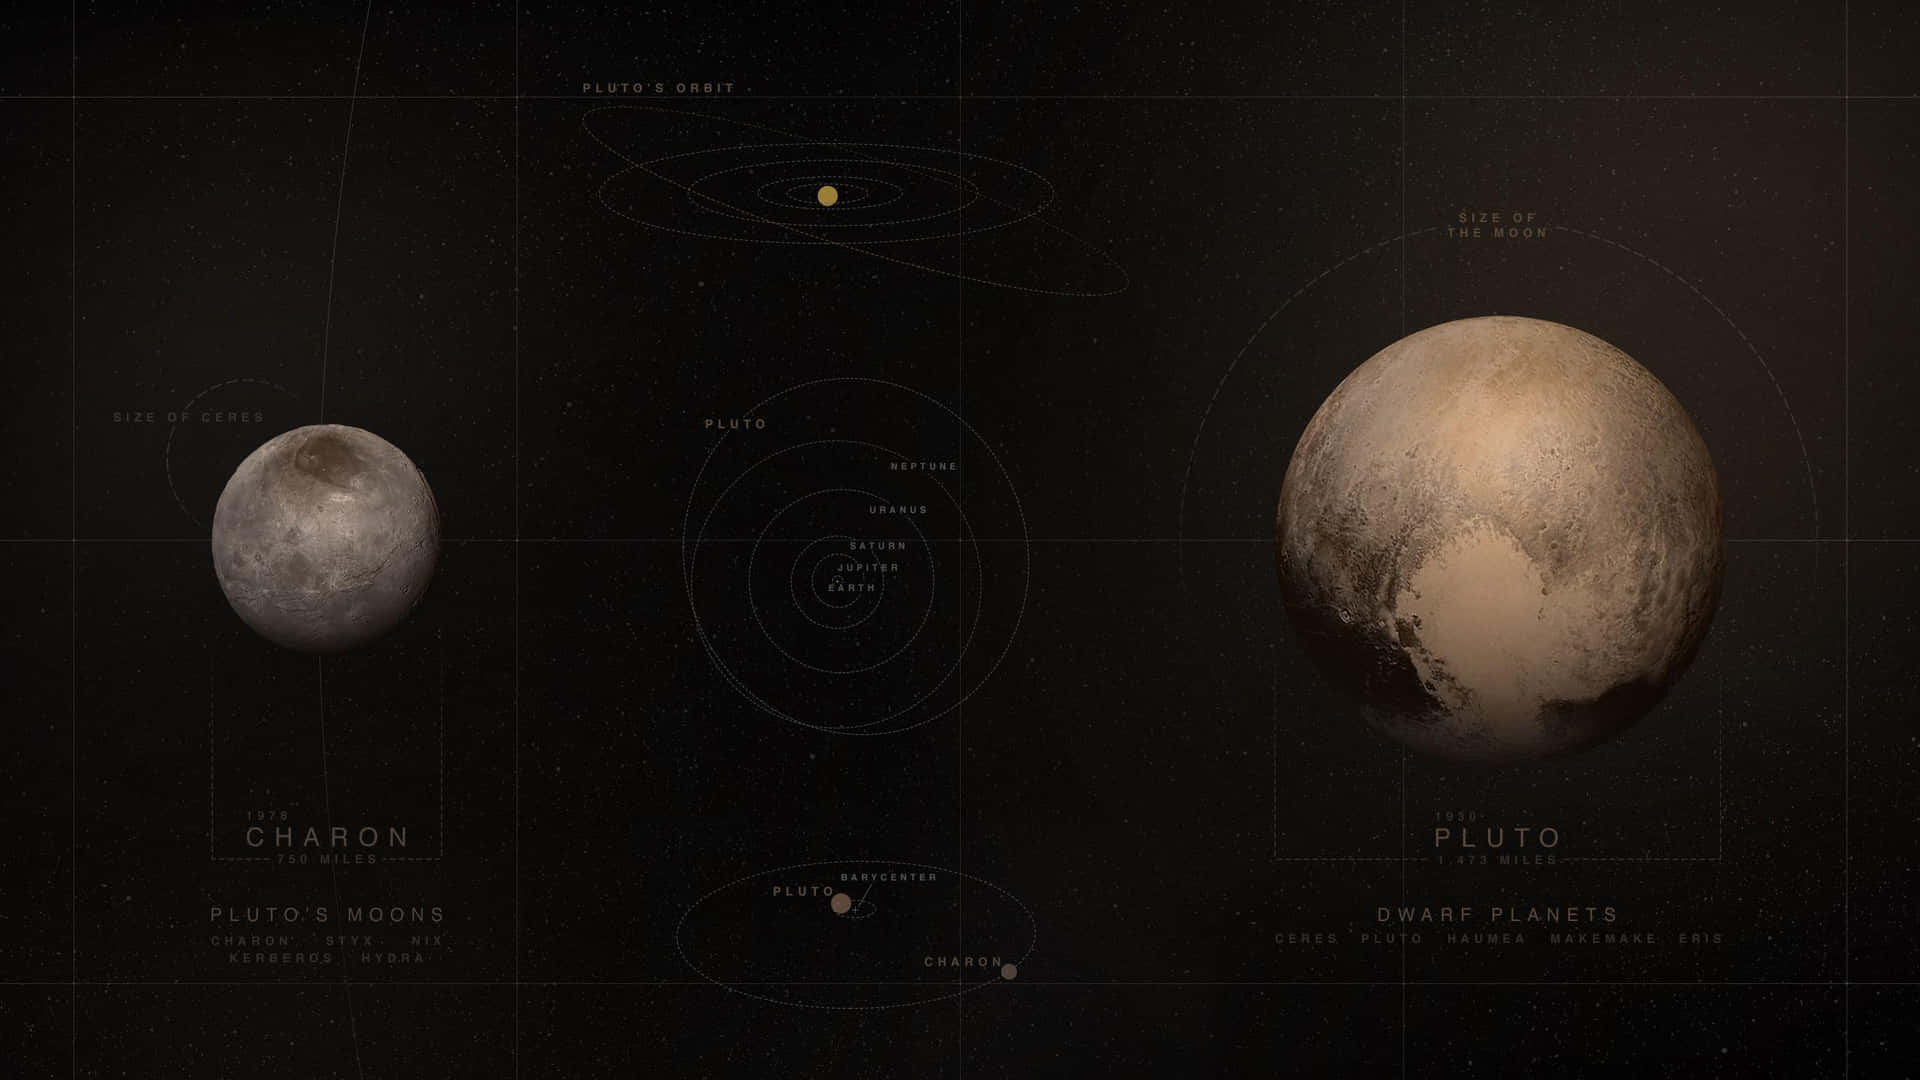 Pluto, A Mysterious Yet Fascinating Dwarf Planet